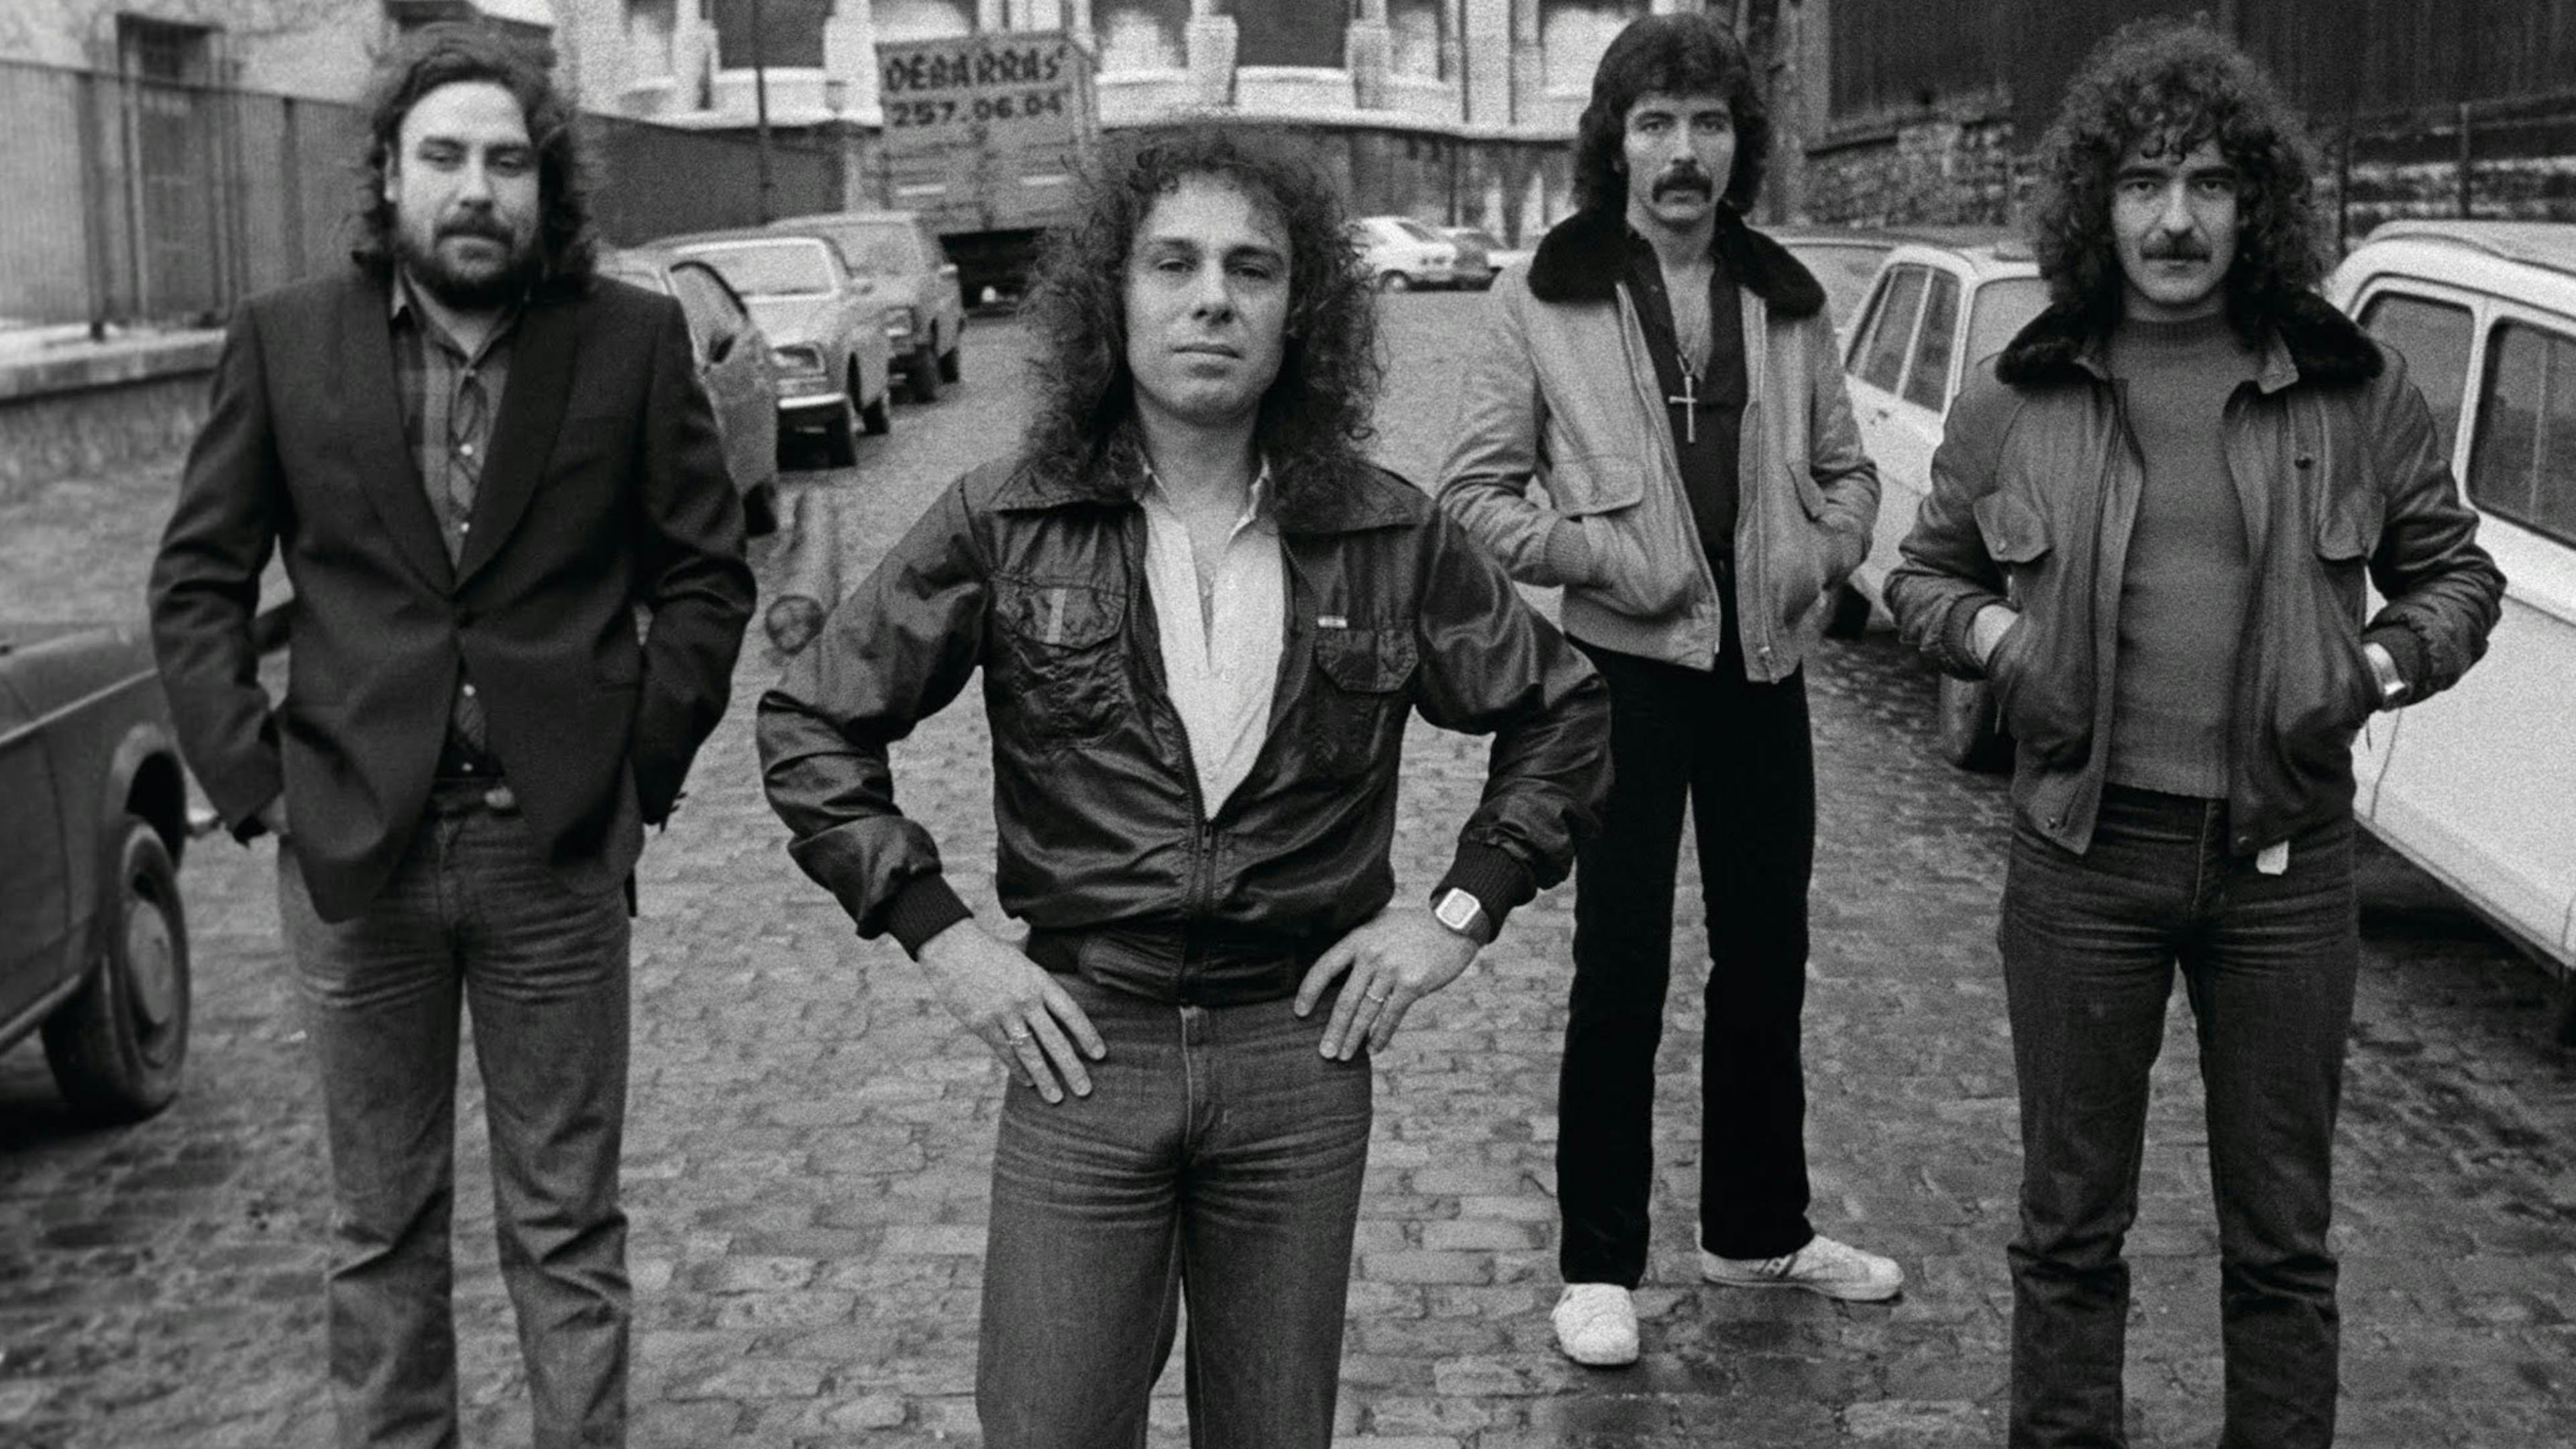 Tony Iommi: “Ronnie James Dio gave us a new lease of life, and it also gave us a challenge”